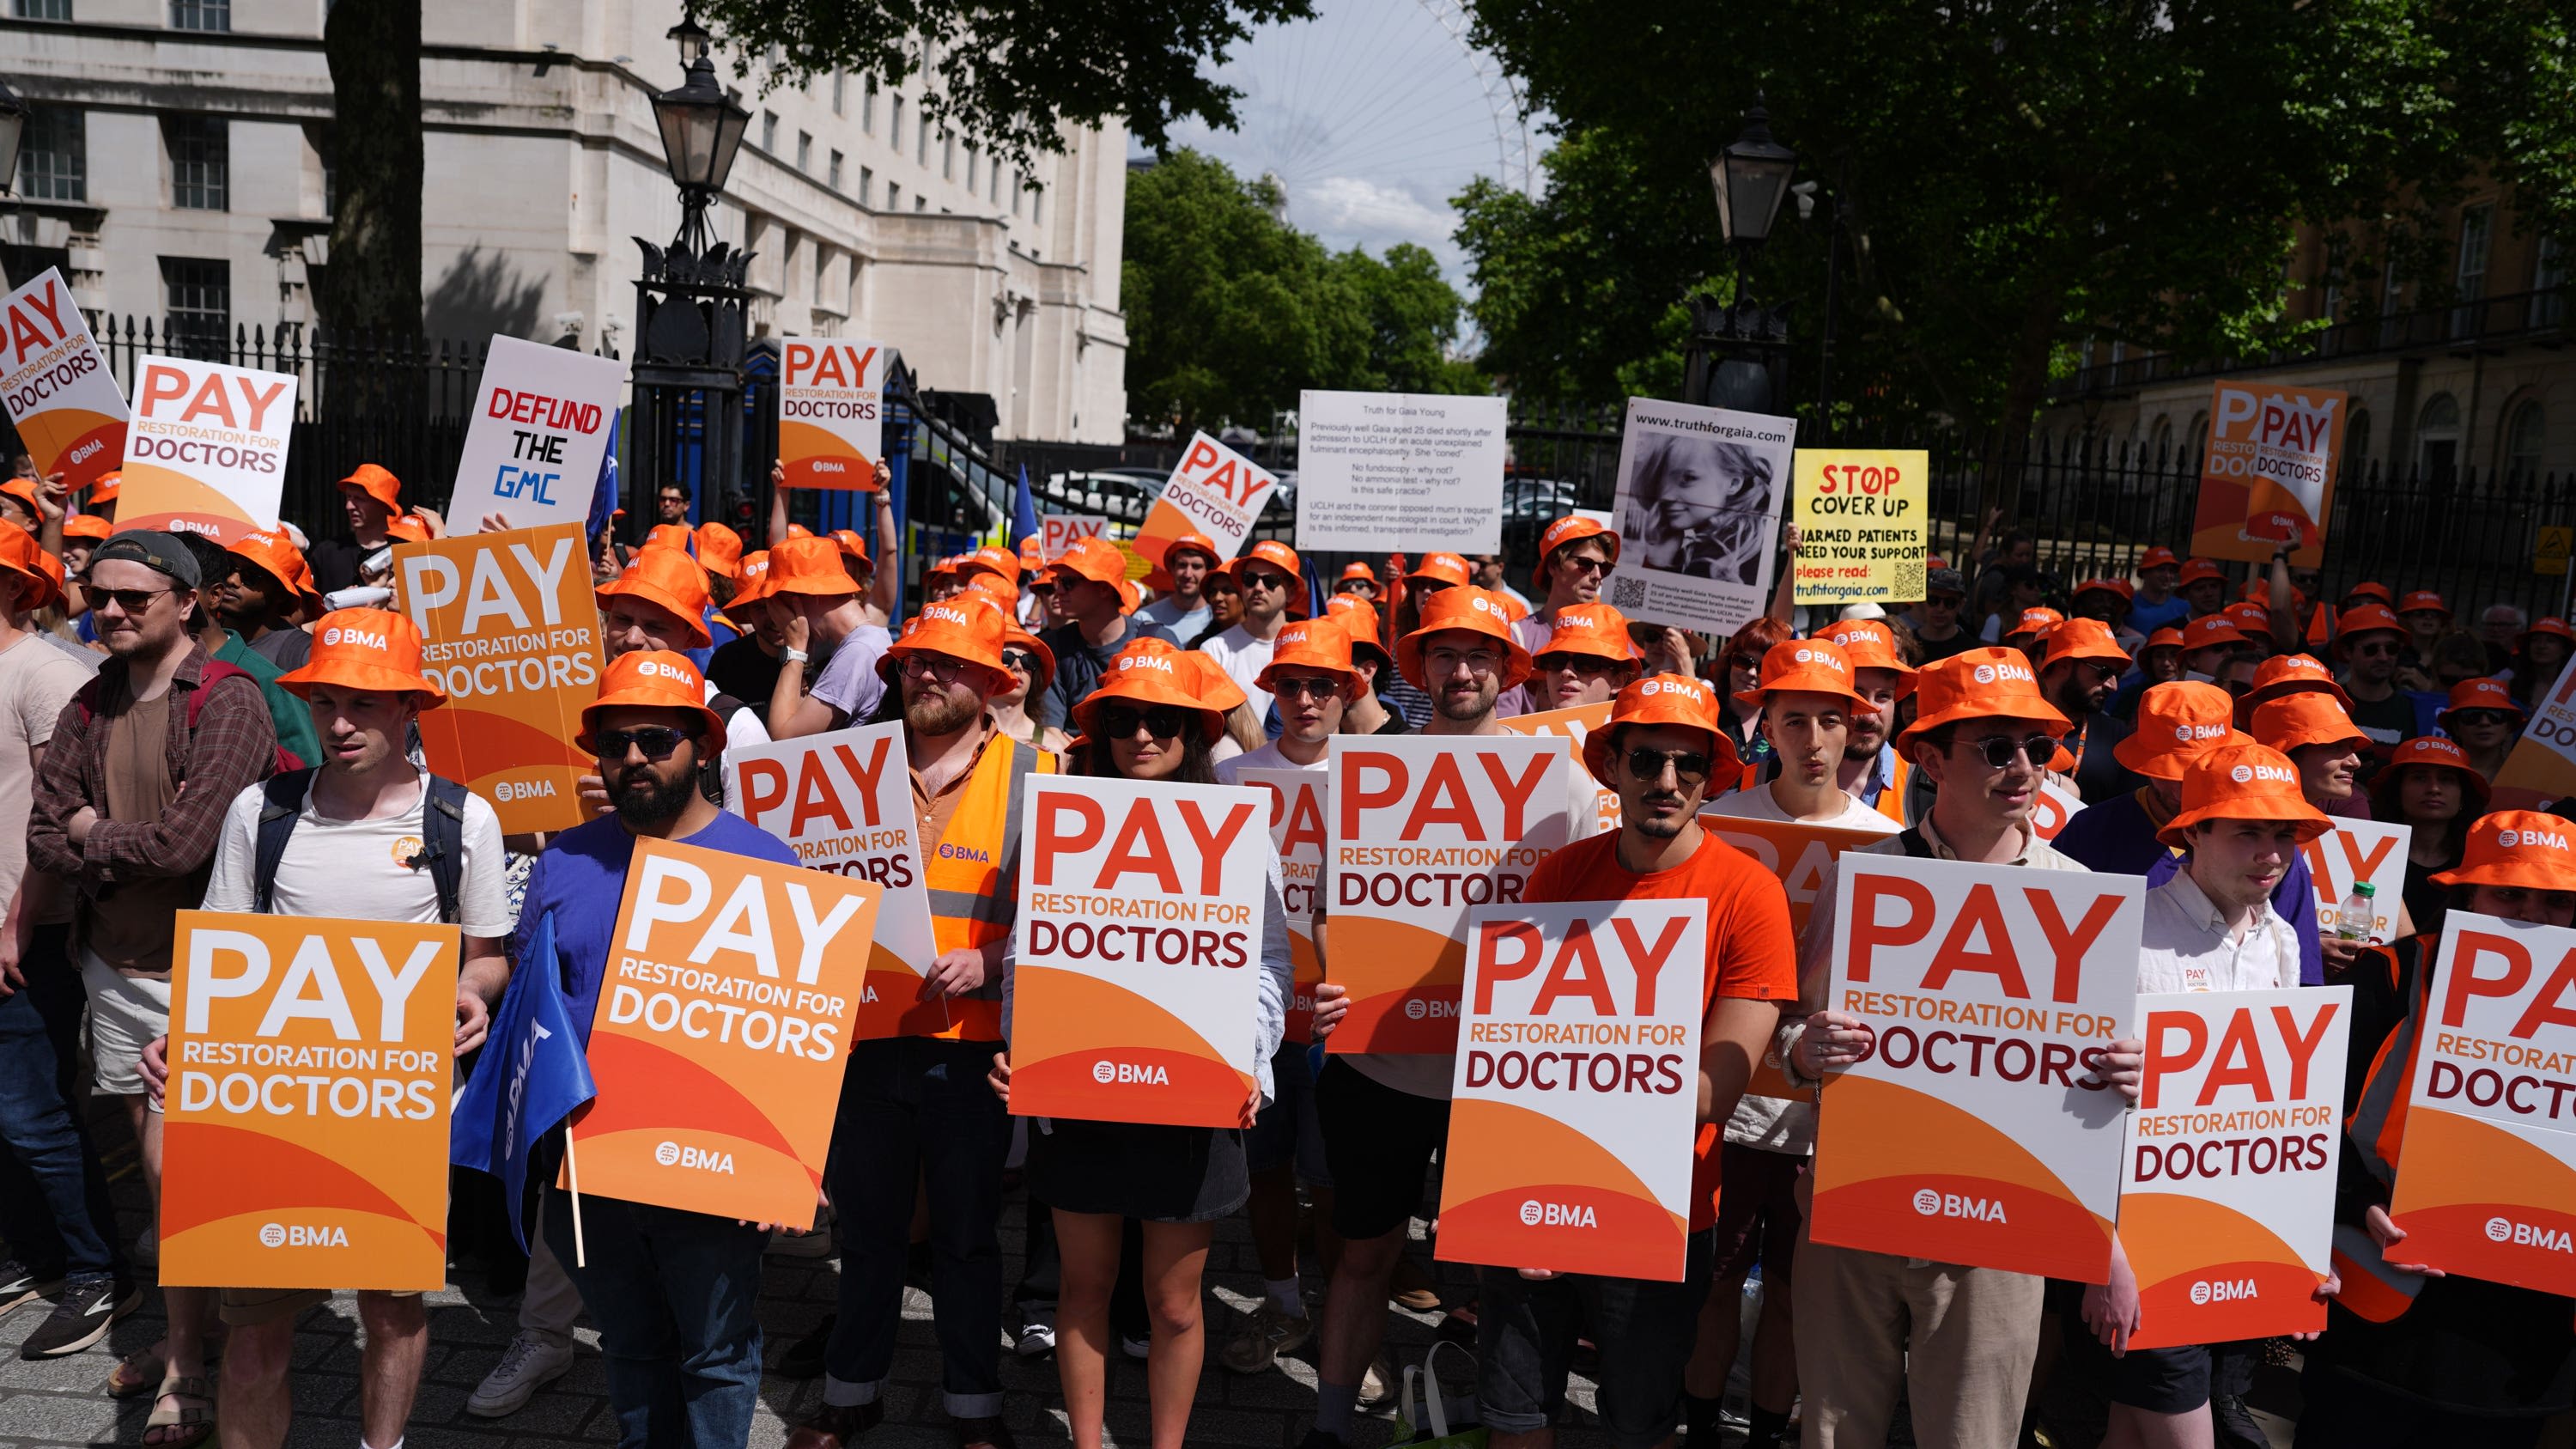 Junior doctor pay deal ‘drop in the ocean’ compared to cost of strikes – Reeves